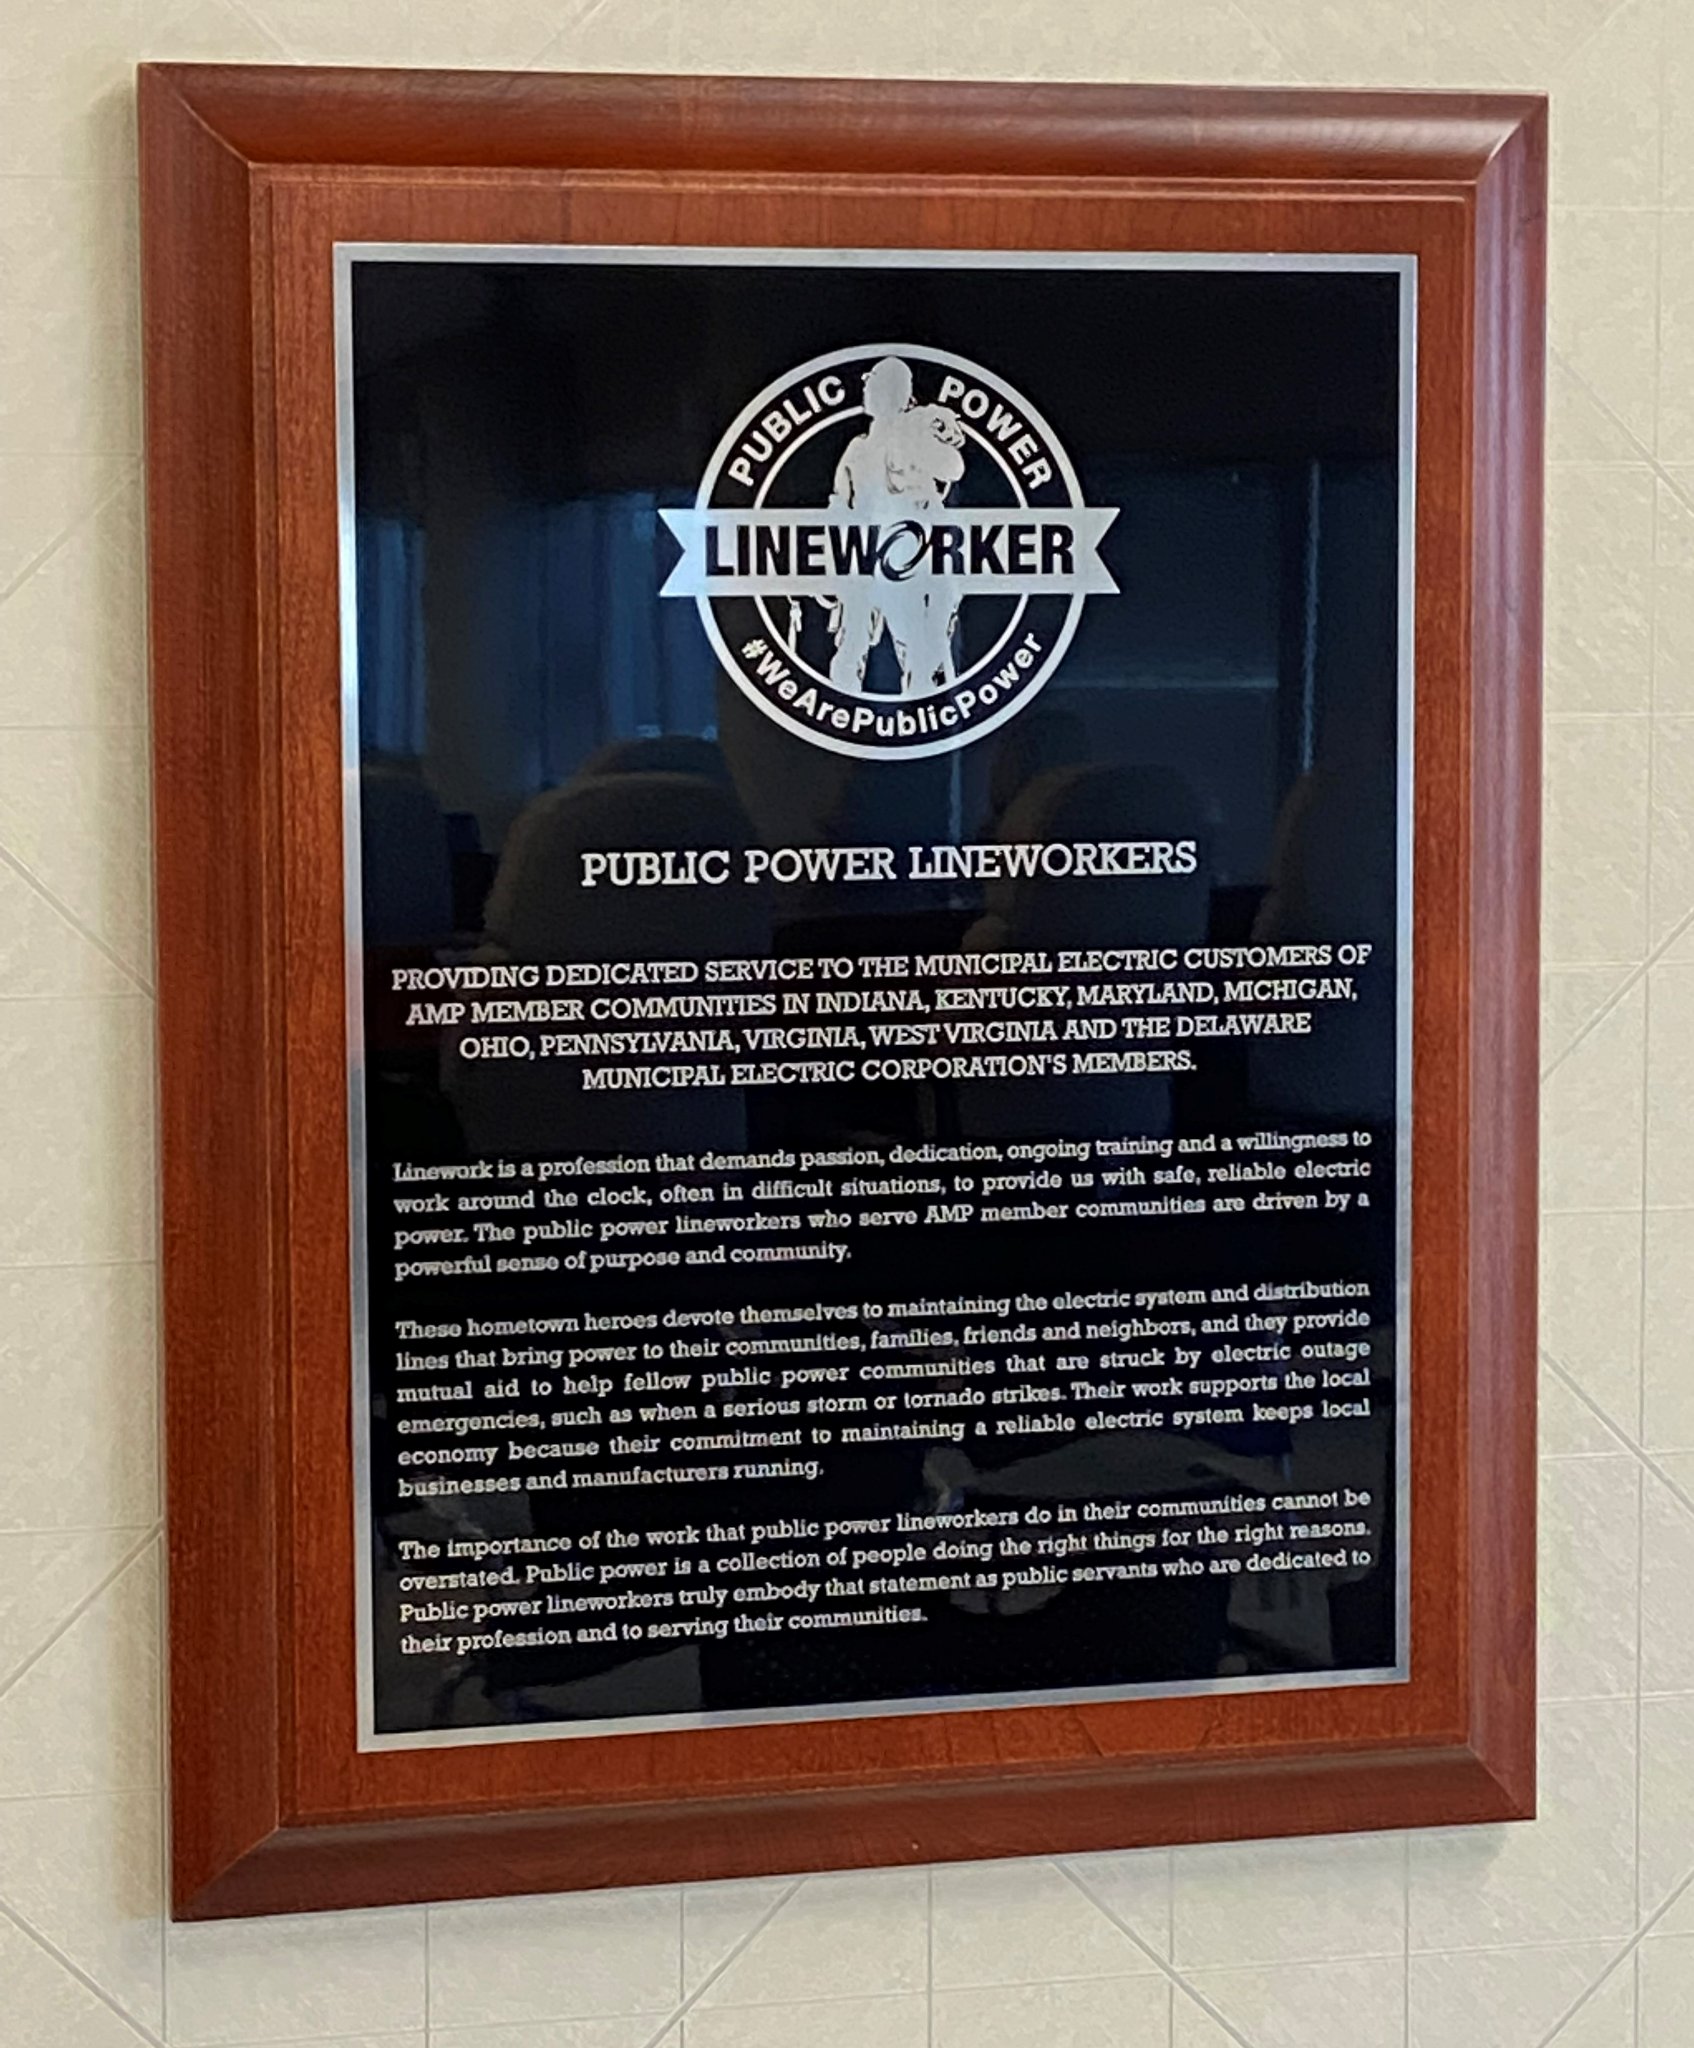 A plaque honoring public power lineworkers will be added to the wall to recognize their outstanding efforts and contributions to AMP and our members.